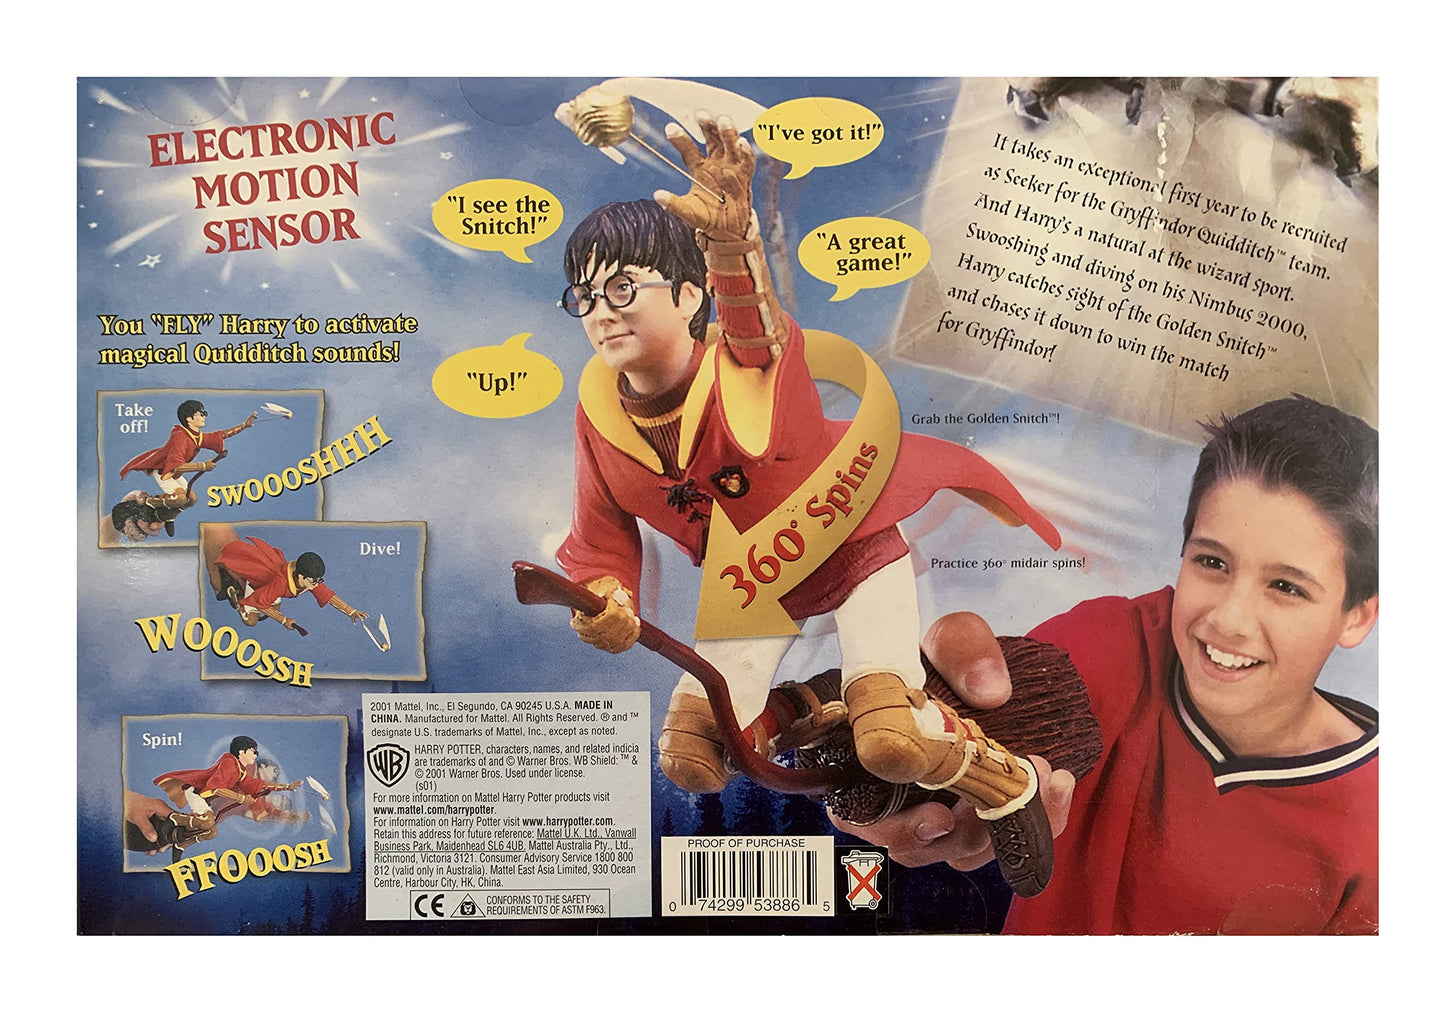 Vintage 2001 Mattel Harry Potter And The Philosphers Stone Snitch Chasing Harry Electronic Figure - Factory Sealed Shop Stock Room Find